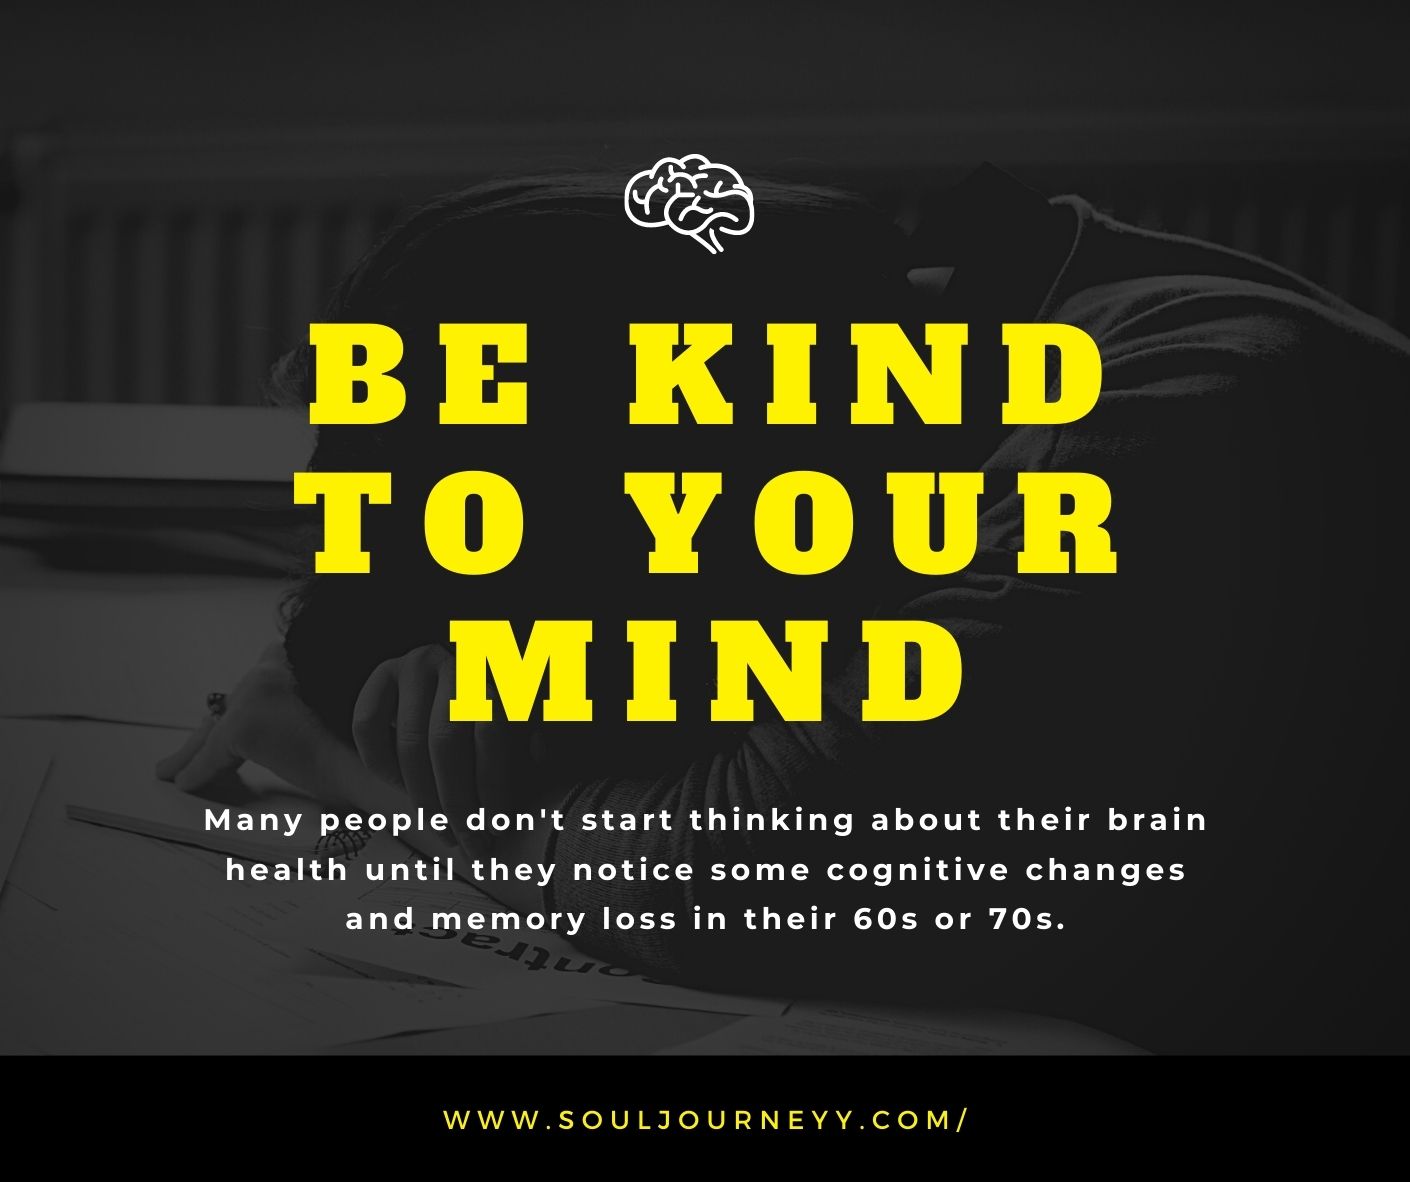 Healthy mind...Be kind to your mind.